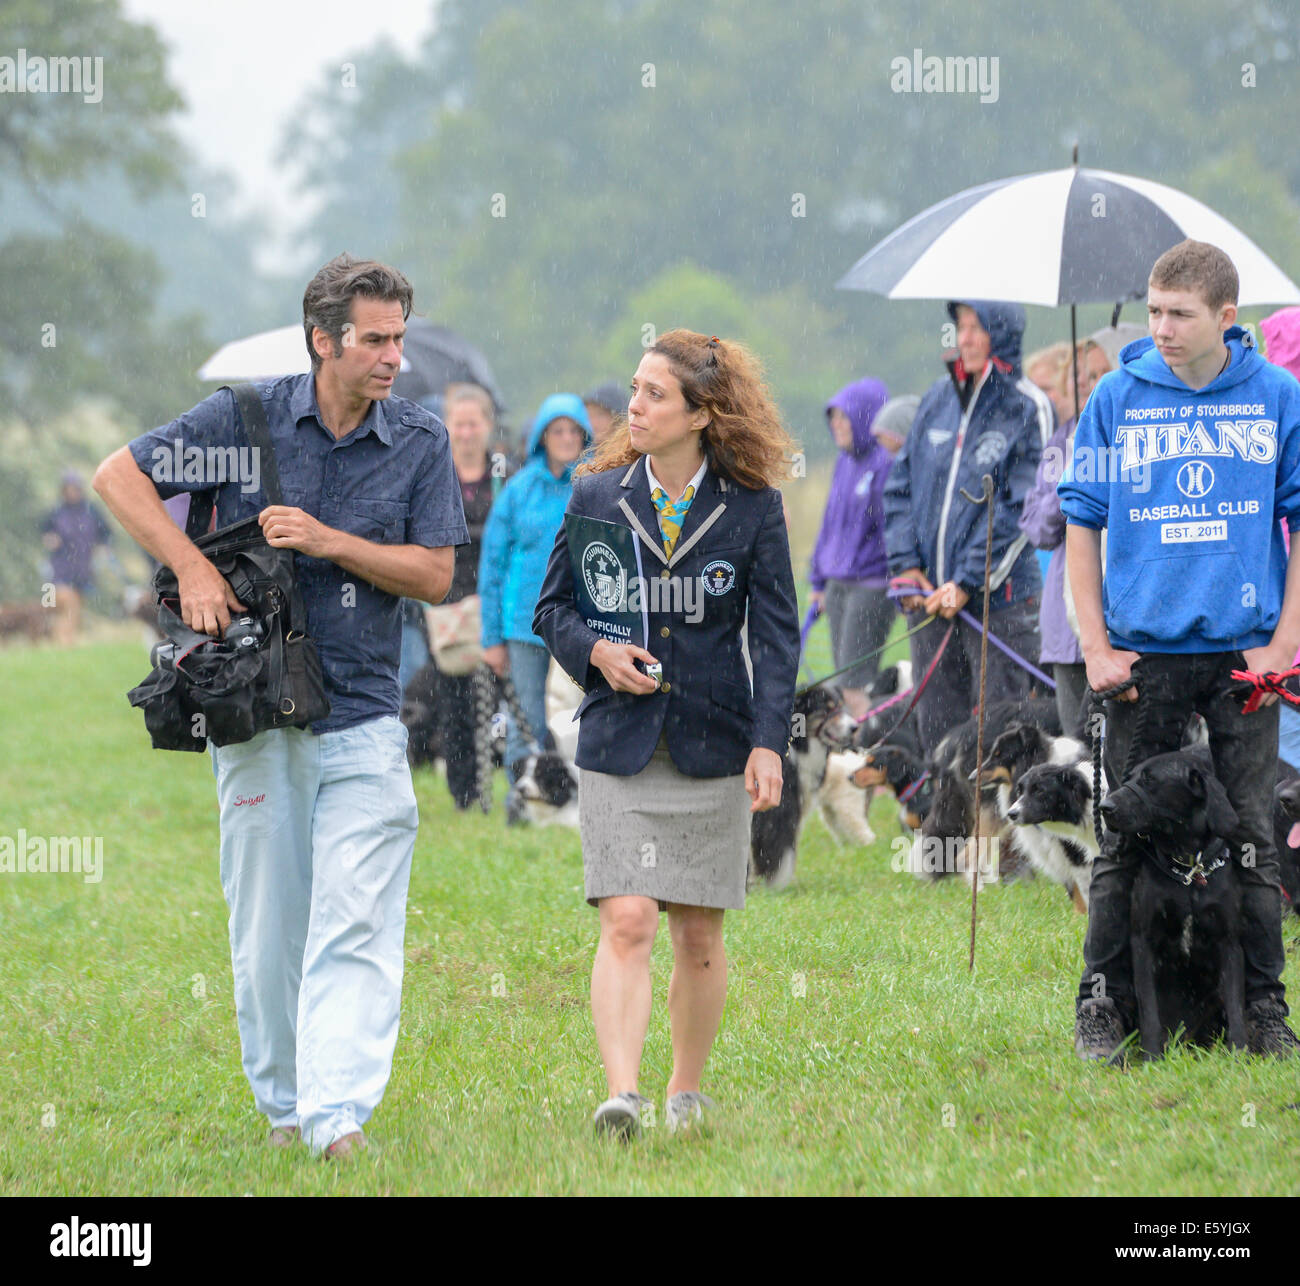 Rockingham castle, UK. 8th August, 2014. In the pouring rain at Rockingham castle, England, on the evening of friday 8 august 2014, a Guinness official inspects an attempt (organised by the Kennel Club) to beat the Guinness world record for the largest simultaneous dog stay. About 220 dogs attended, and so the record of 627 remains unbeaten. Credit:  miscellany/Alamy Live News Stock Photo